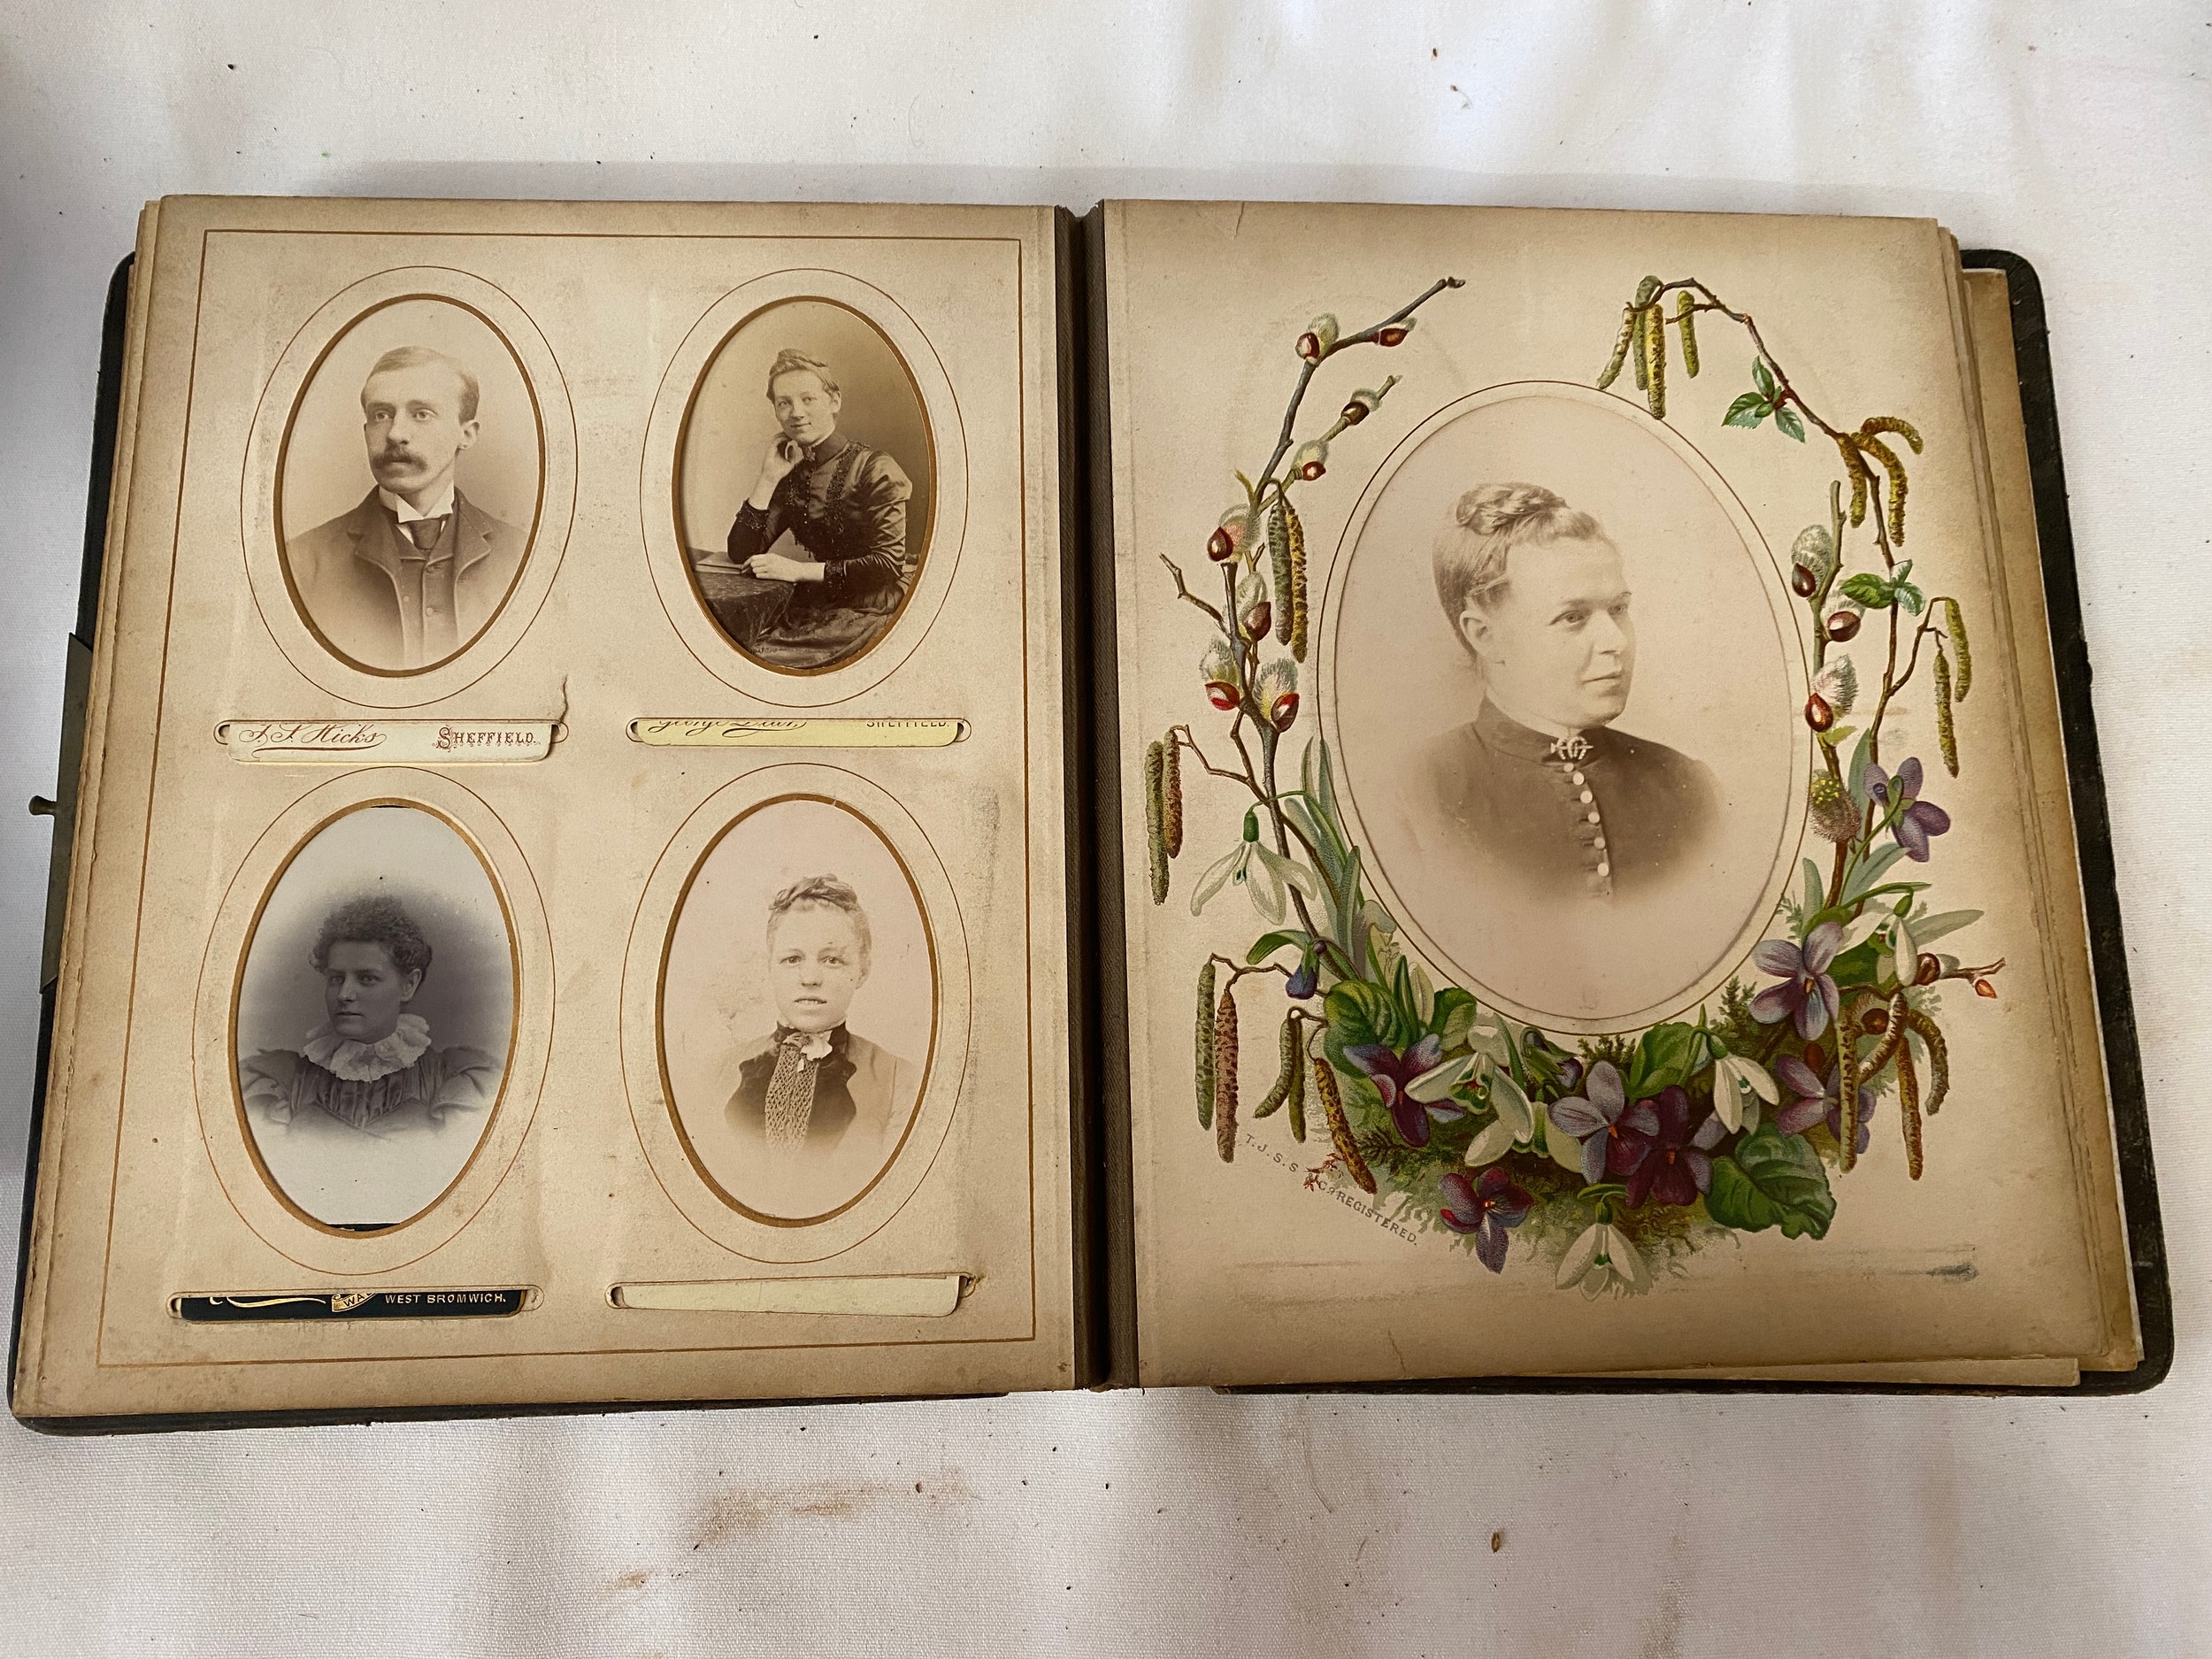 Photograph albums; Saltley College X'mas 1887 presented to Thomas Withers by his fellow students - Image 10 of 30